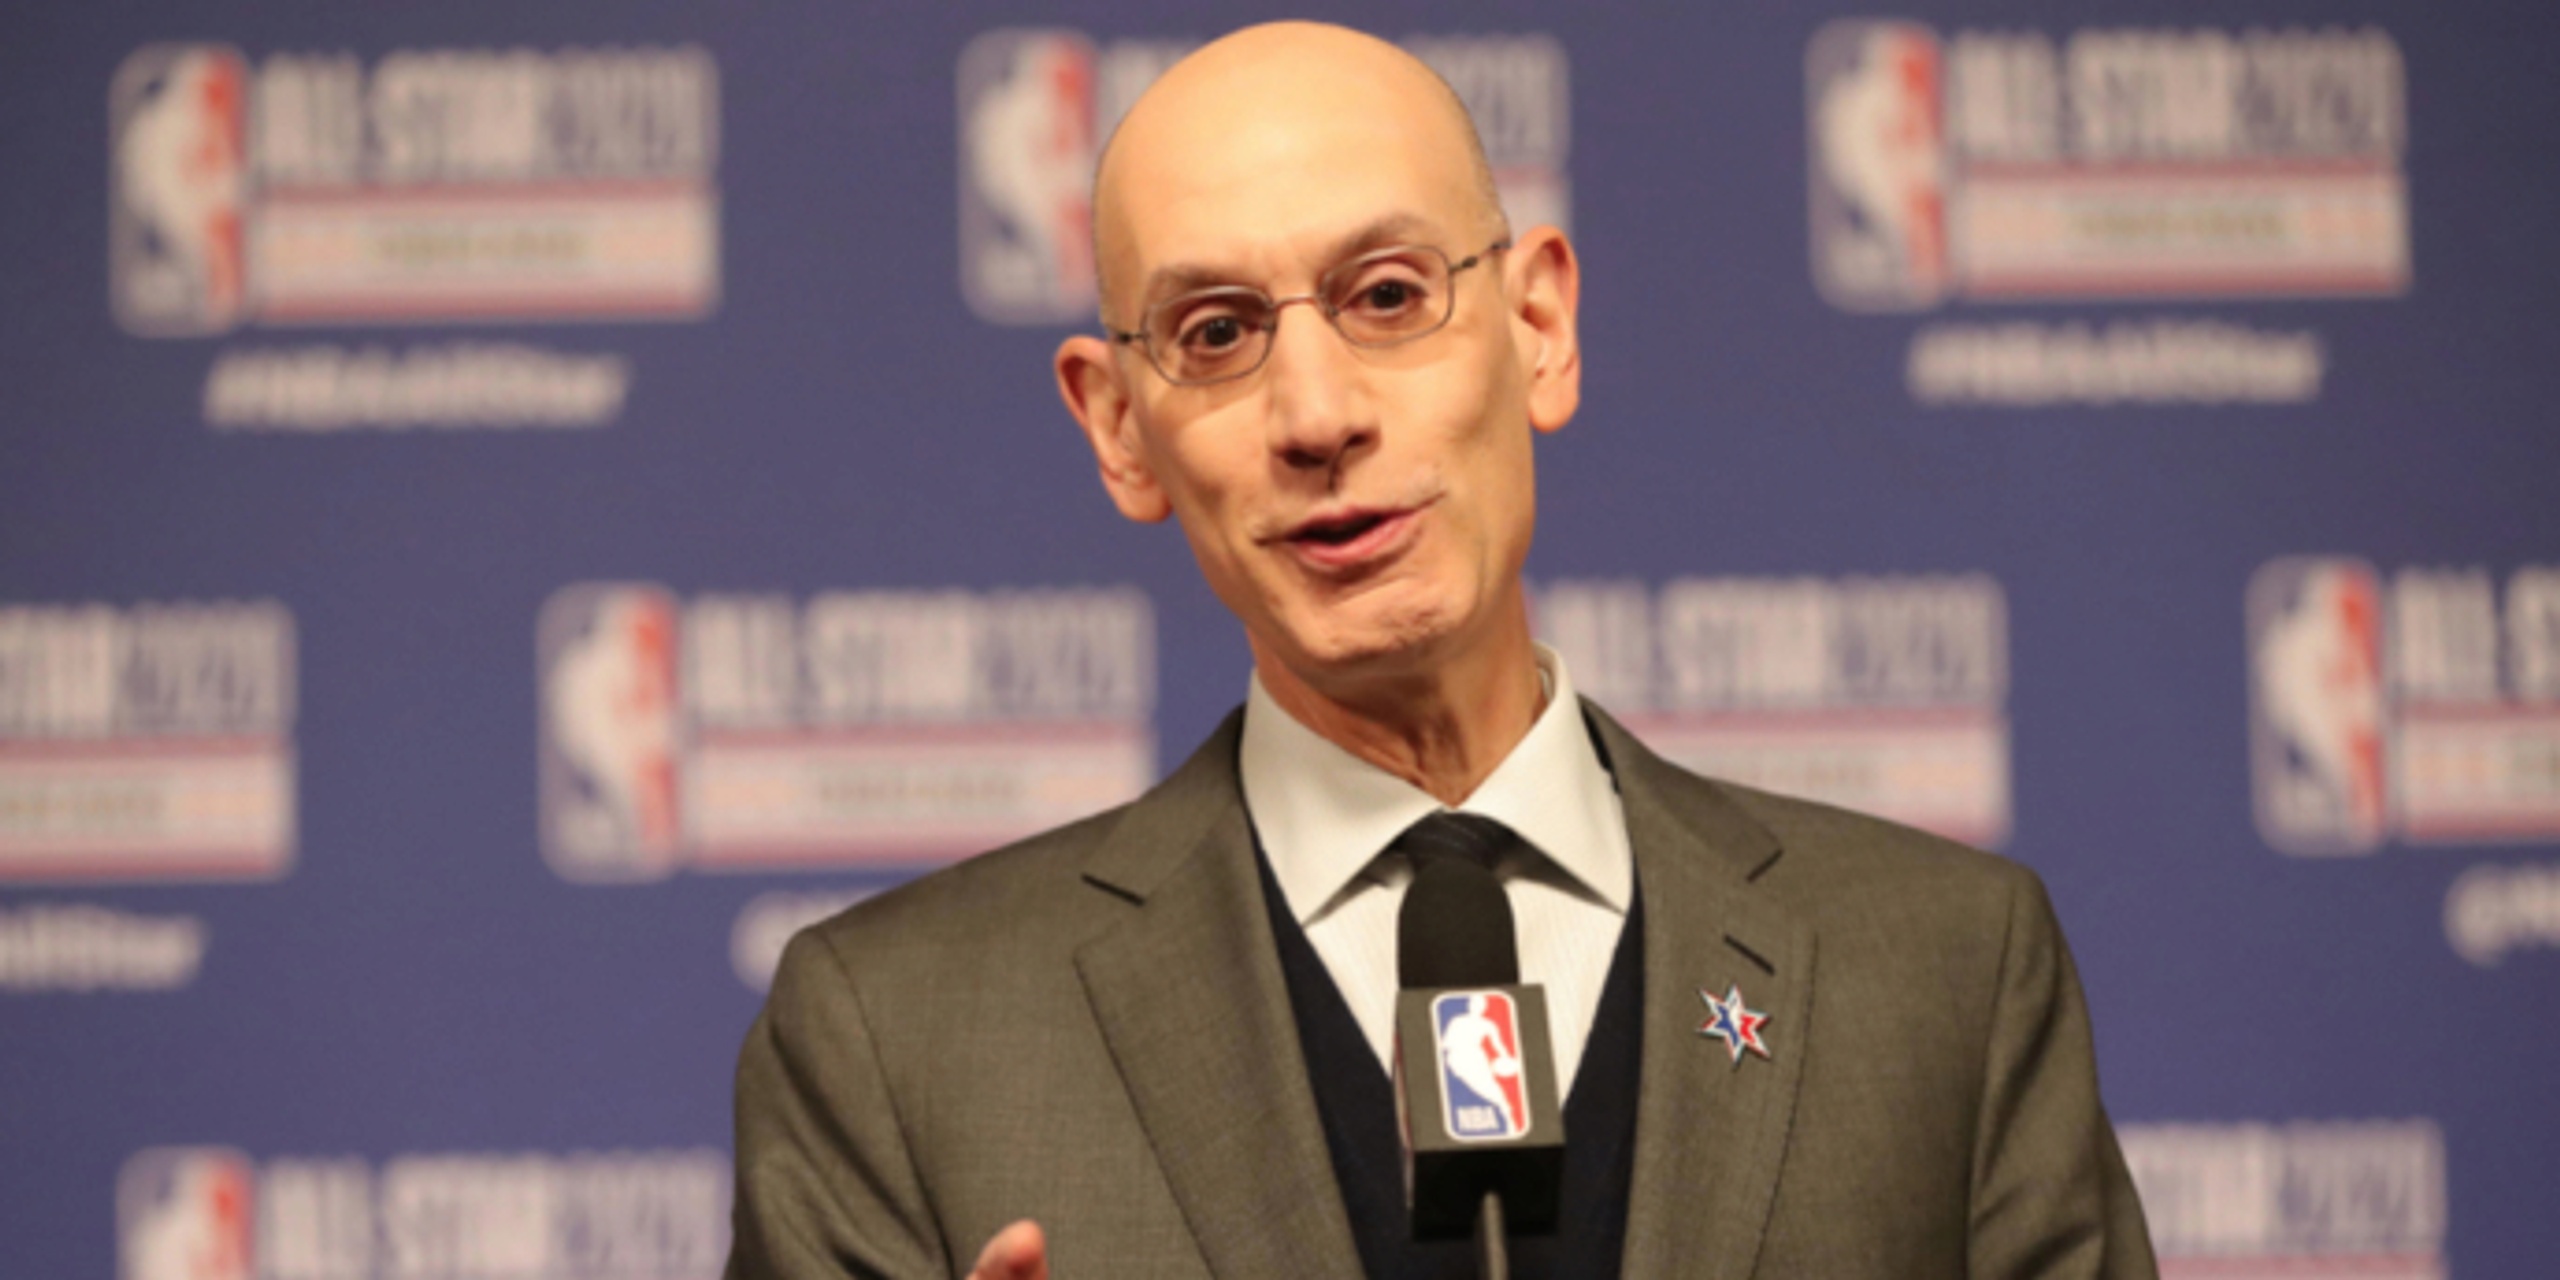 NBA training camp could start Dec. 1st